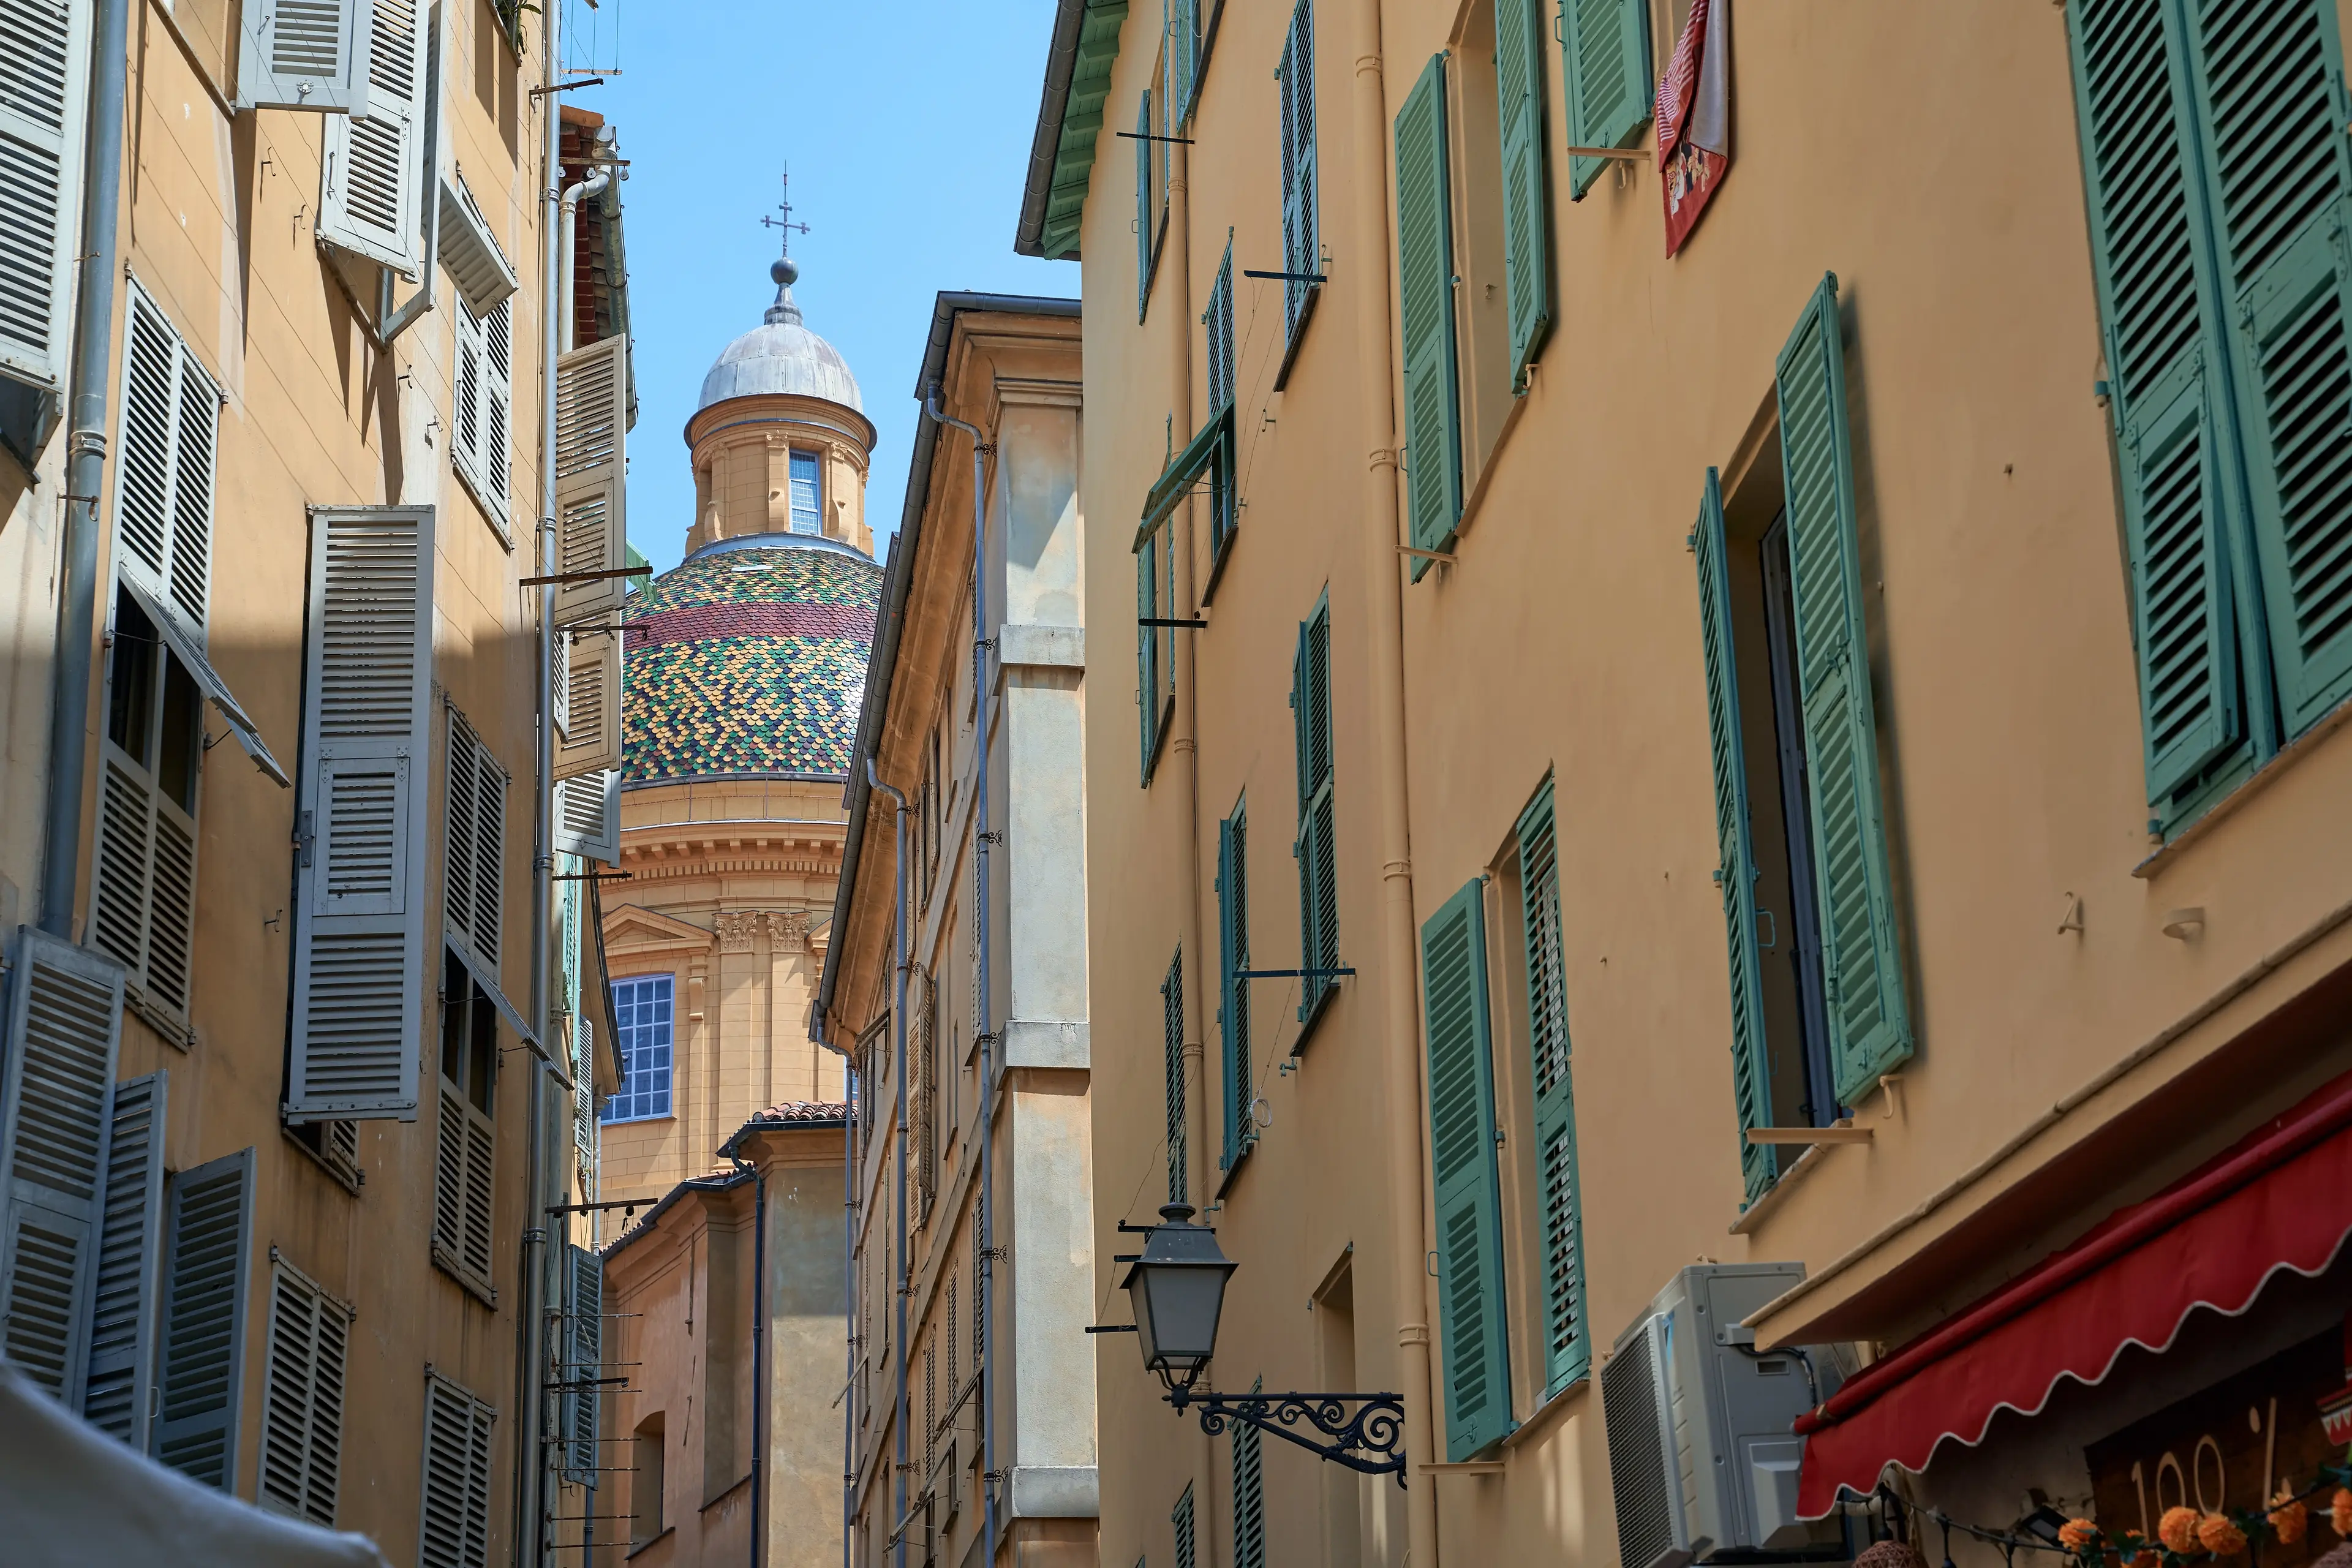 Old Town of Nice